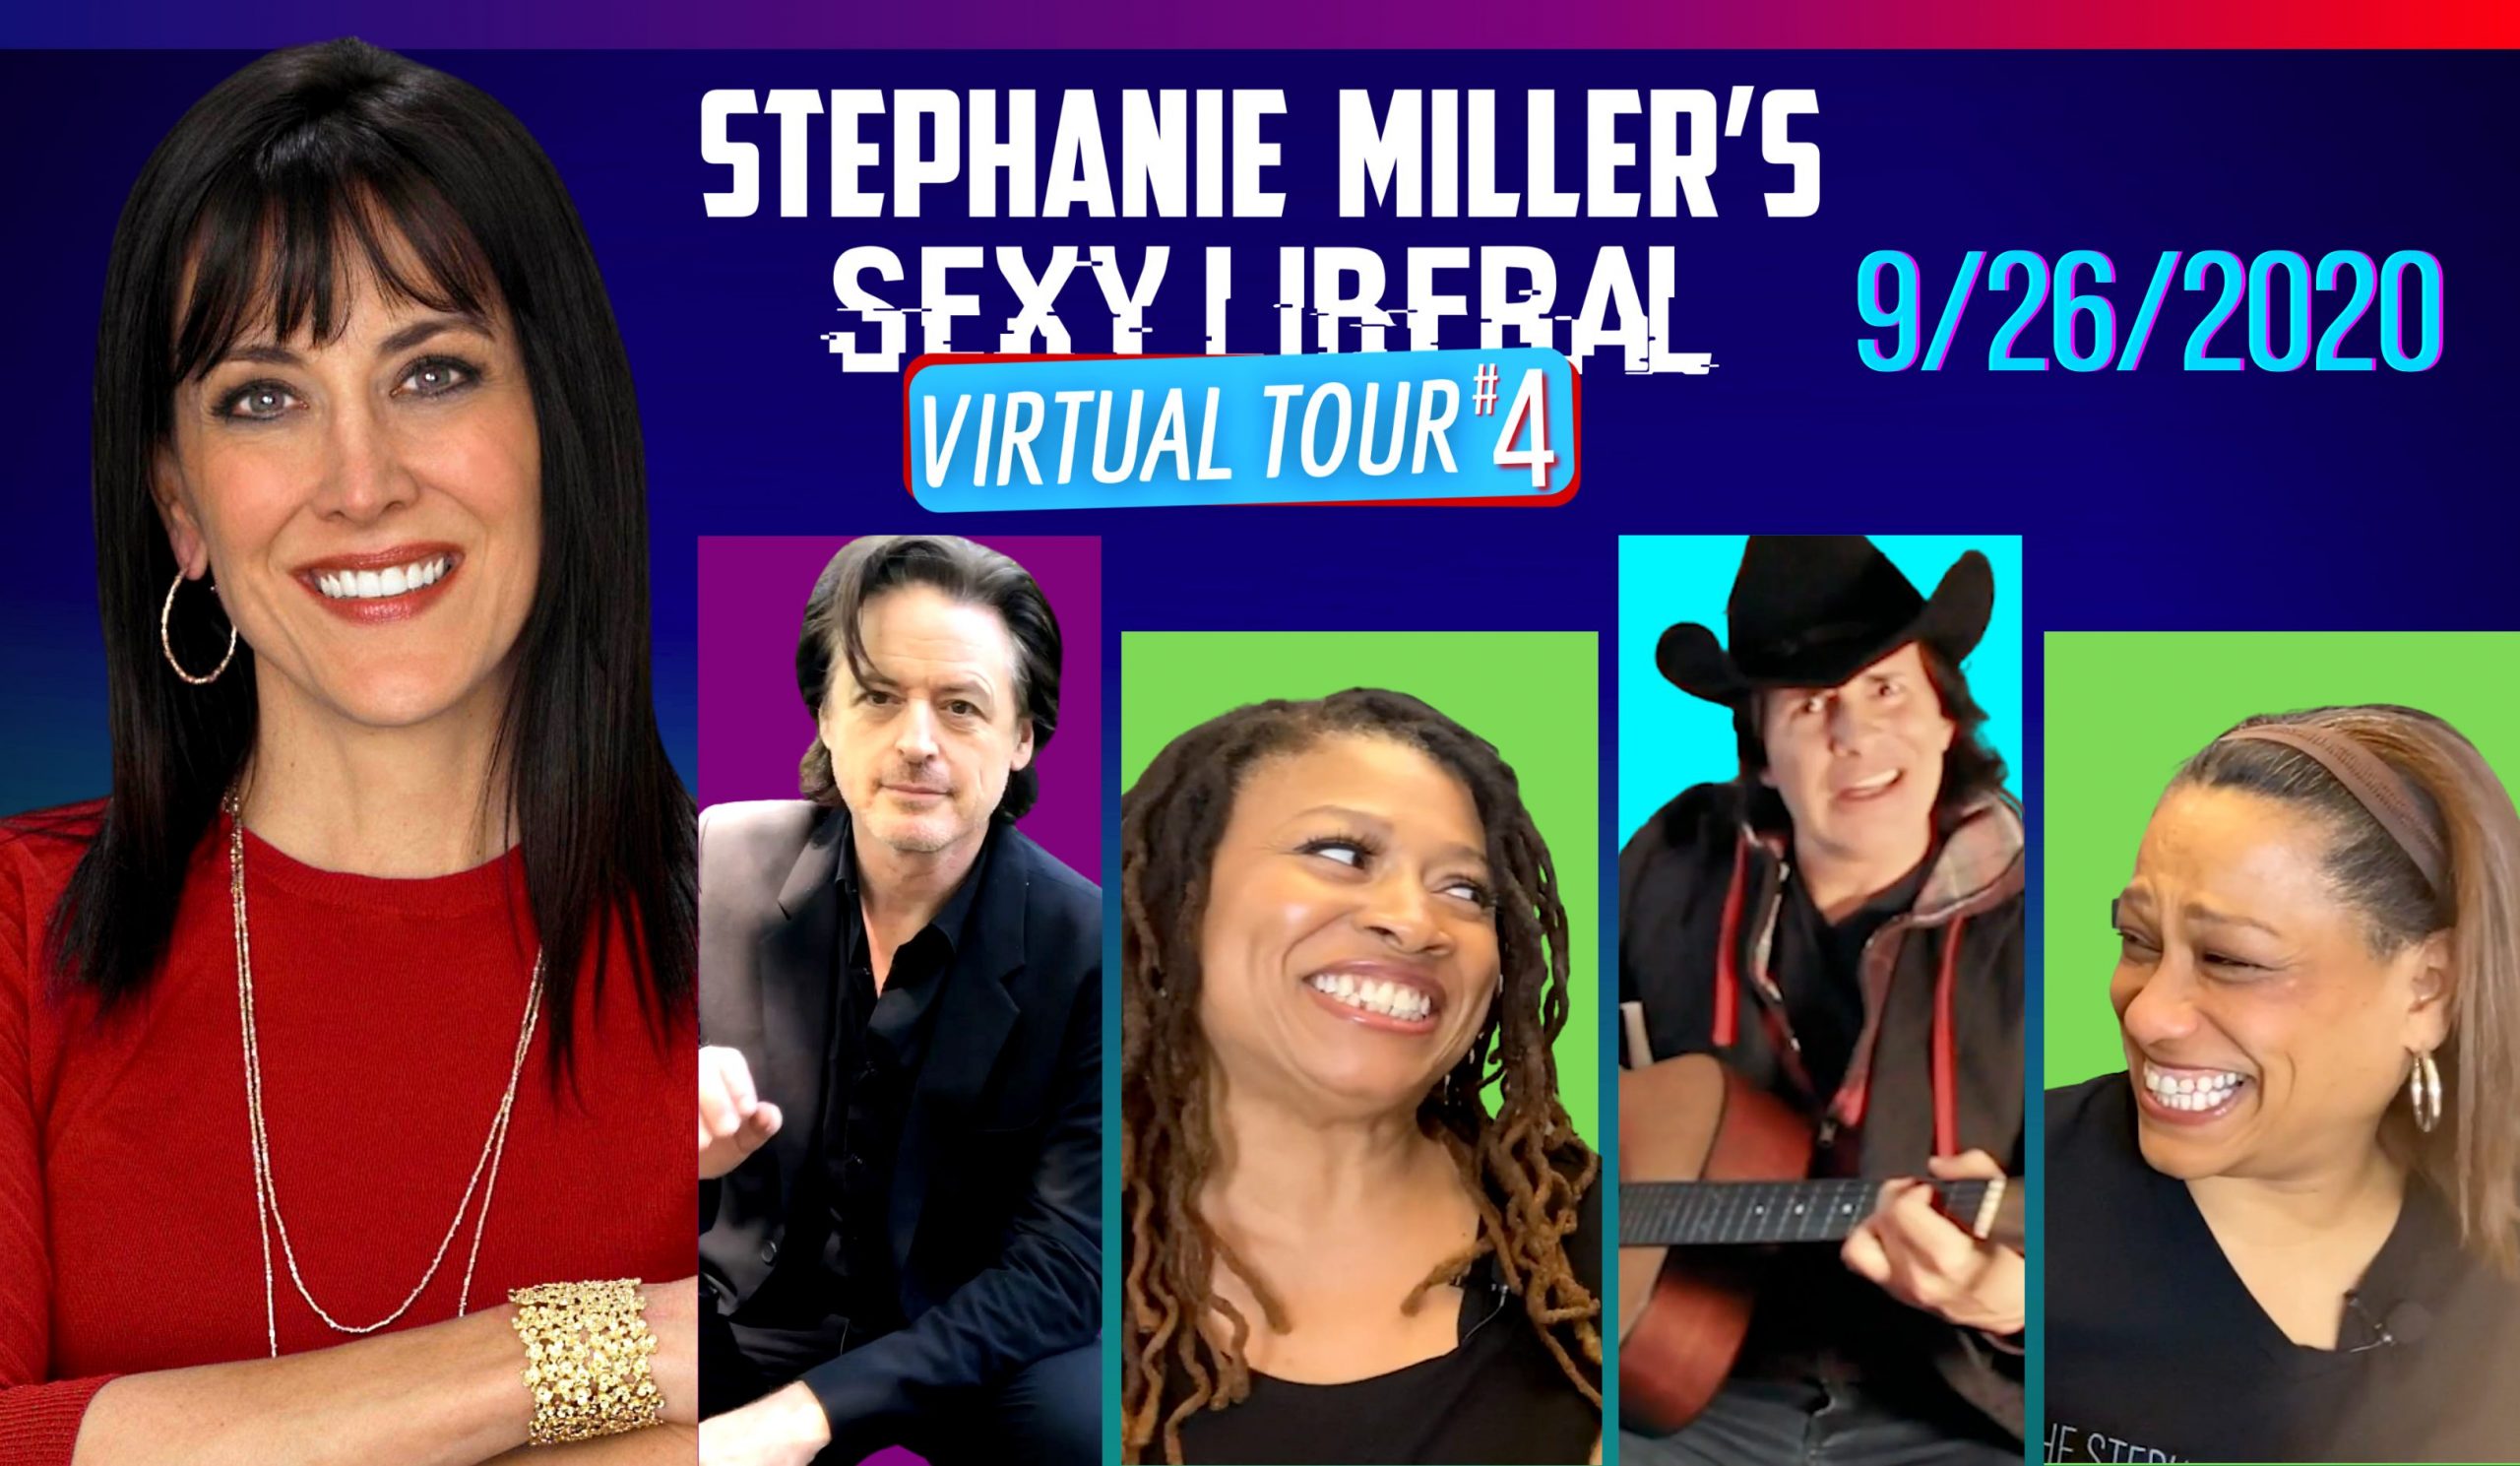 Sexy Liberal Virtual Tour 4 is THIS SATURDAY!! STEPHANIE MILLER SHOW